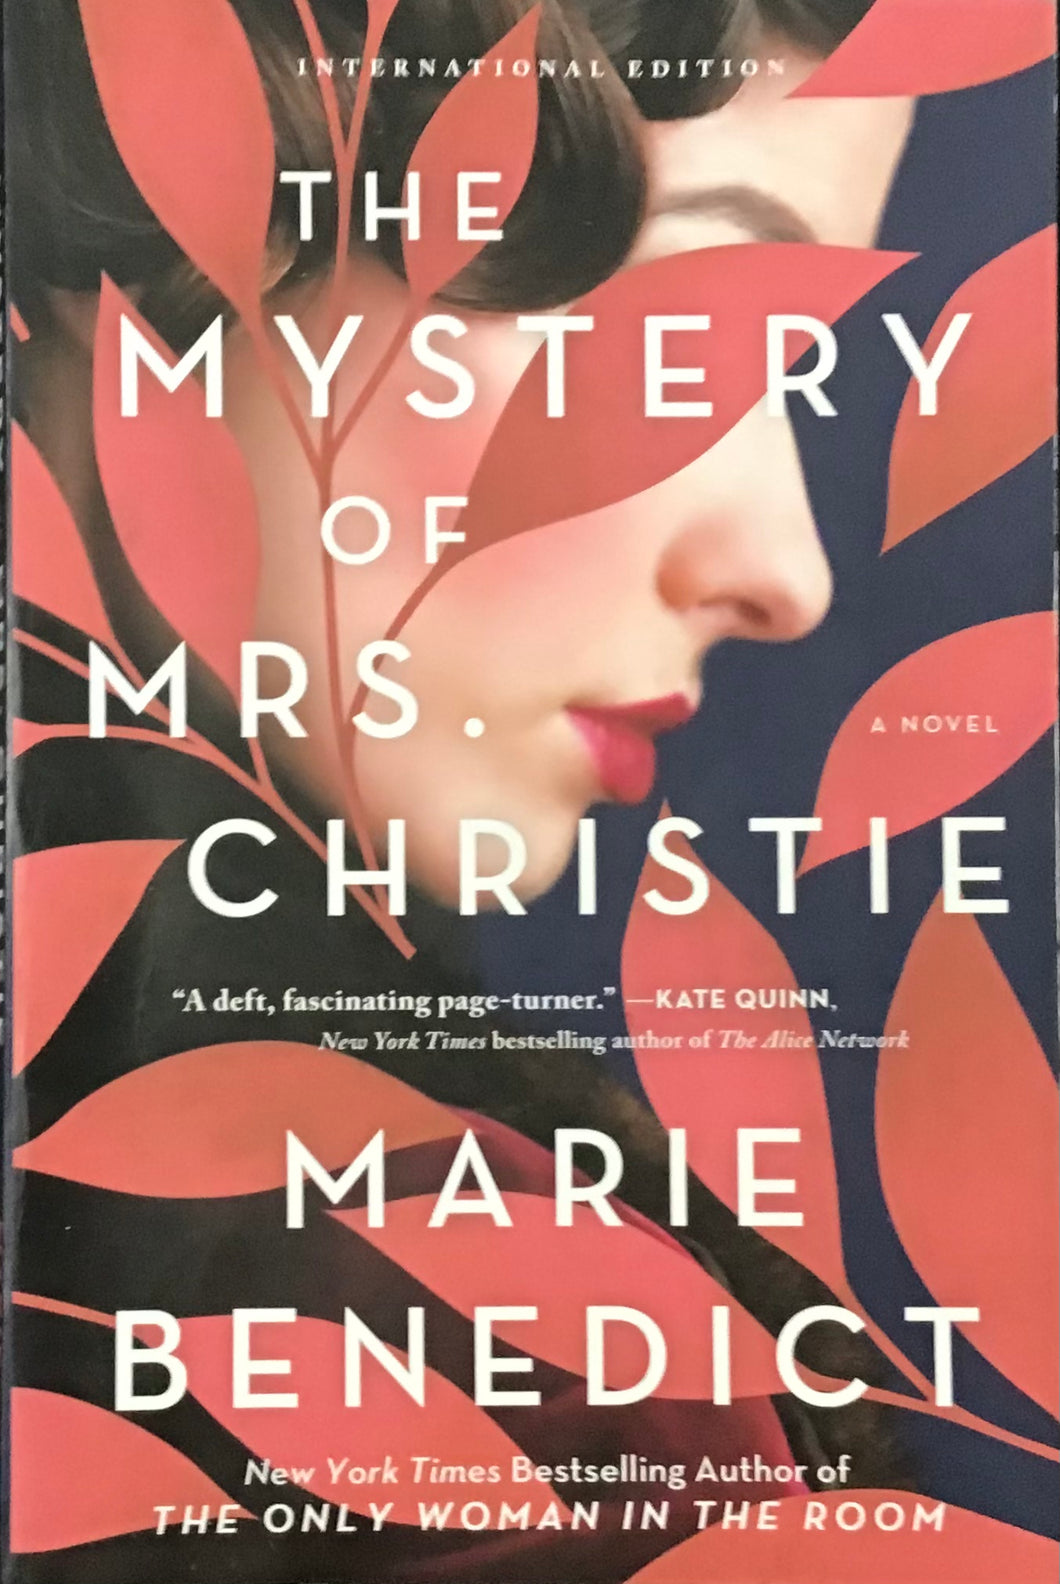 The Mystery Of Mrs. Christie, Marie Benedict